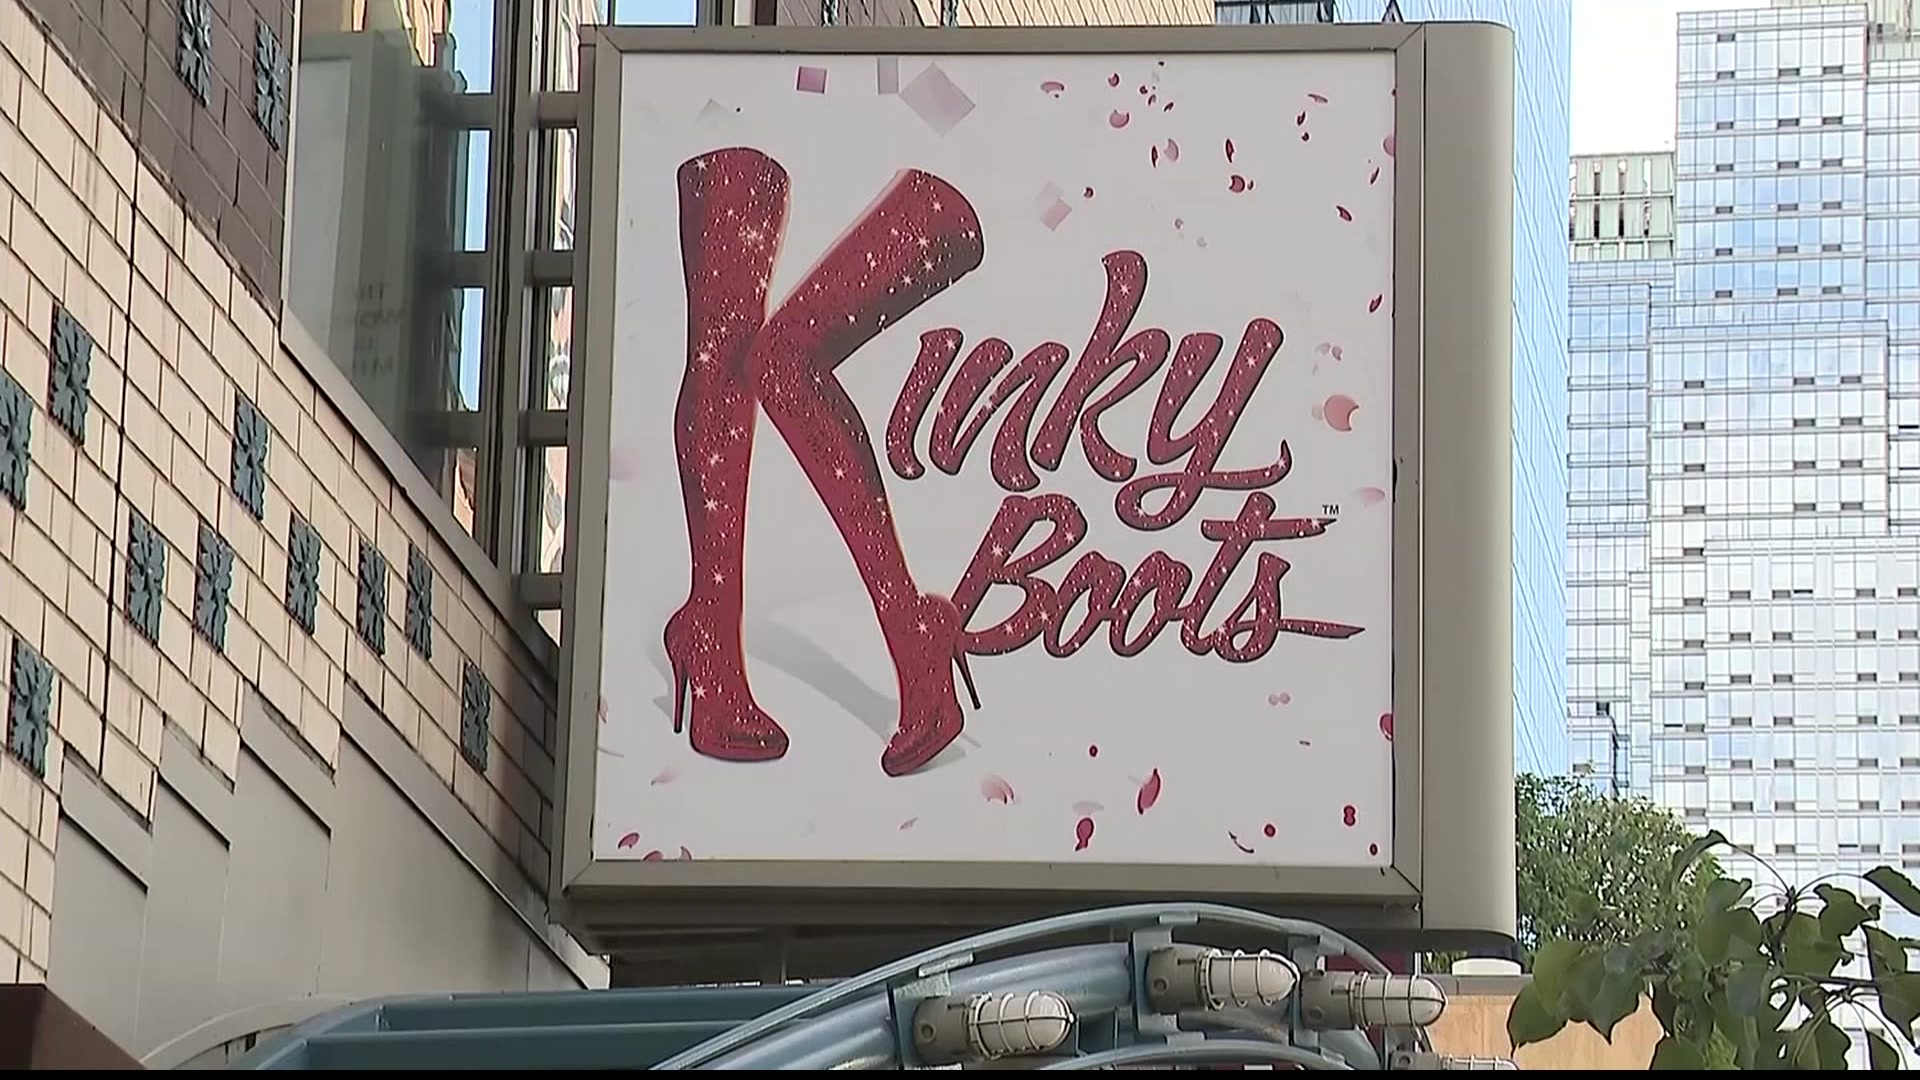 Musical Kinky Boots is back in the more intimate space of Stage 42